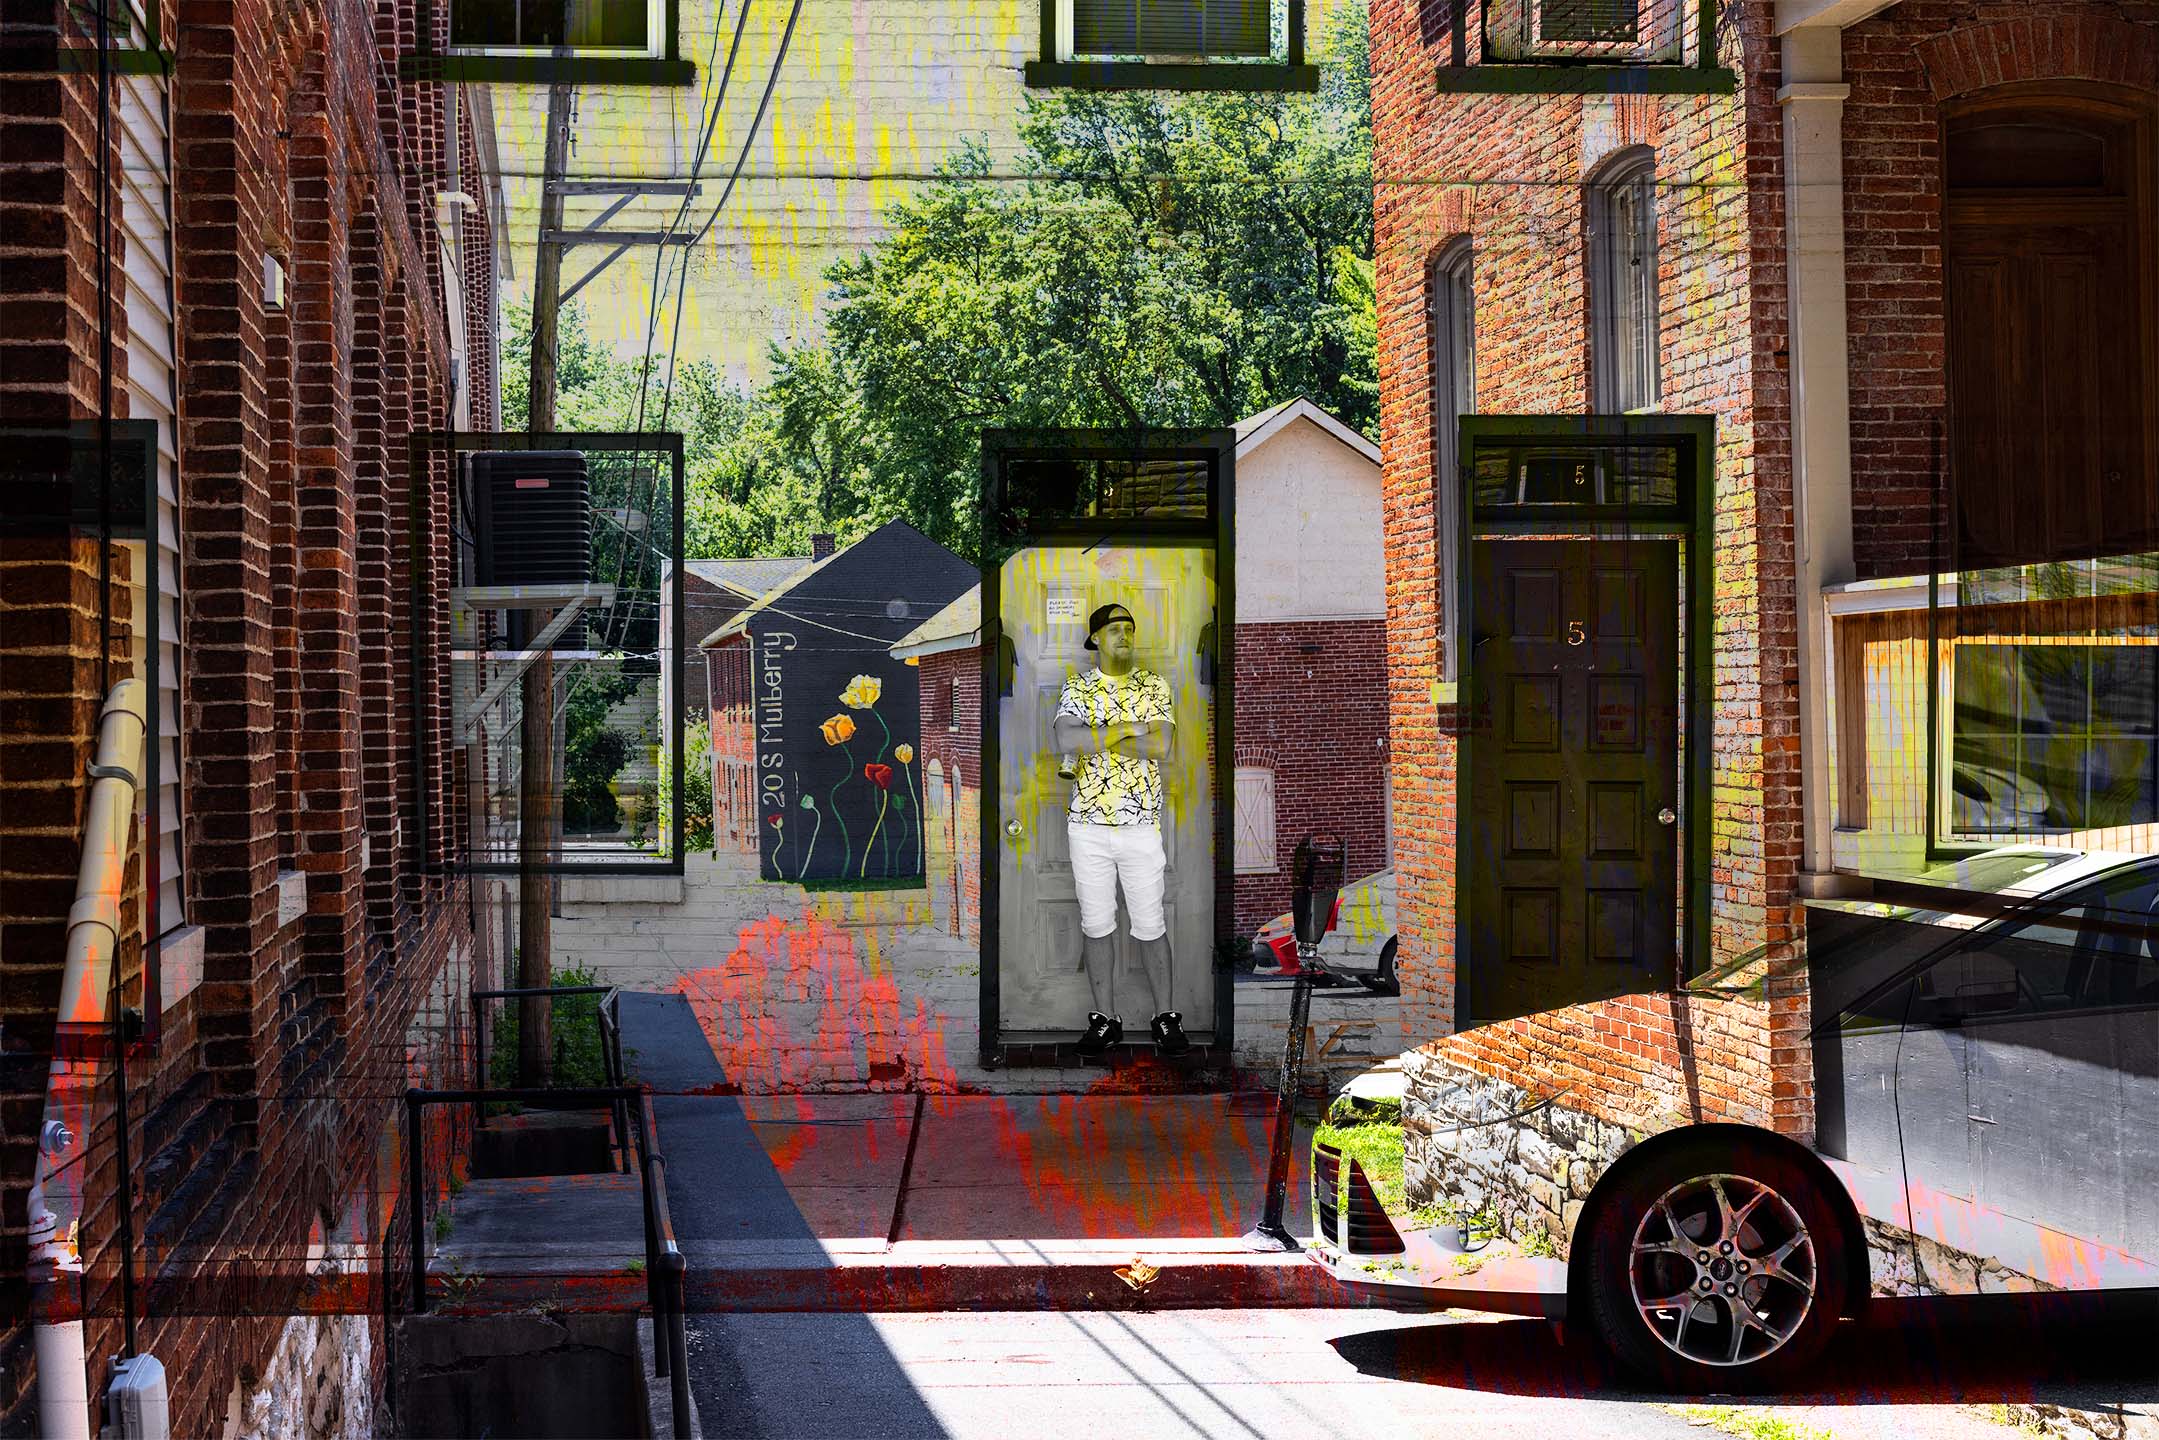 Man standin with images of a street with buildings and cars layered